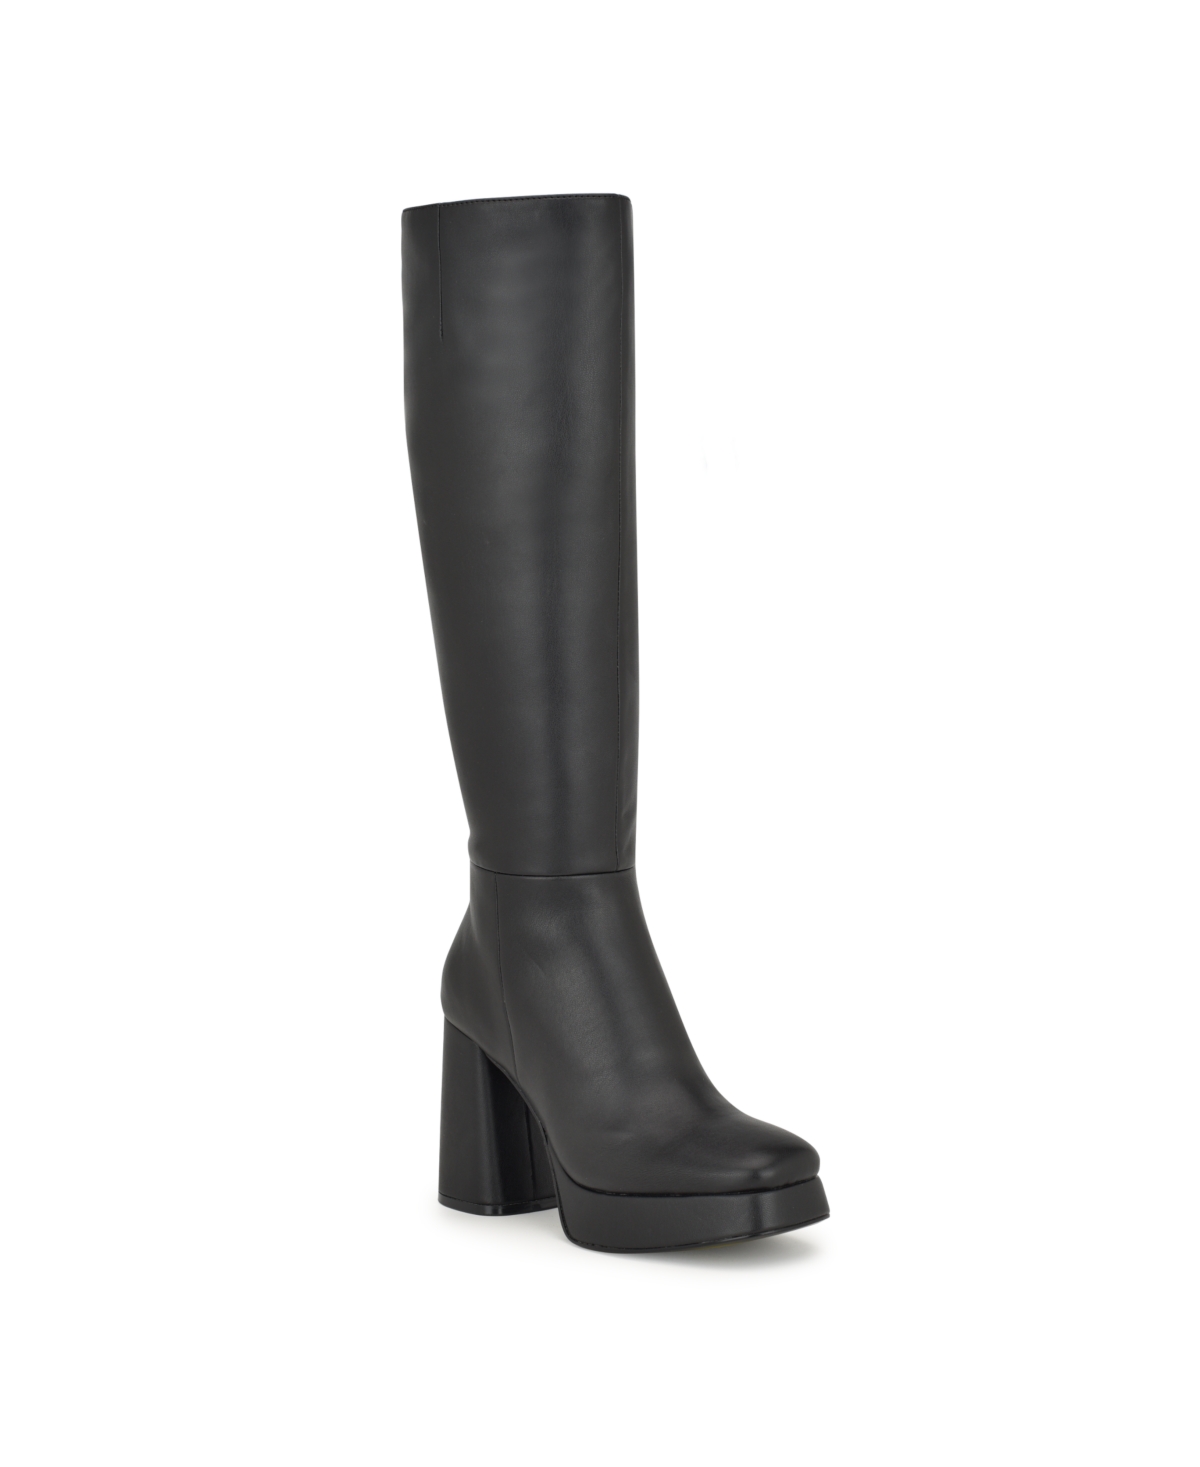 Nine West Women's Vadda Block Heel Square Toe Dress Regular Calf Boots In Black Smooth- Faux Leather